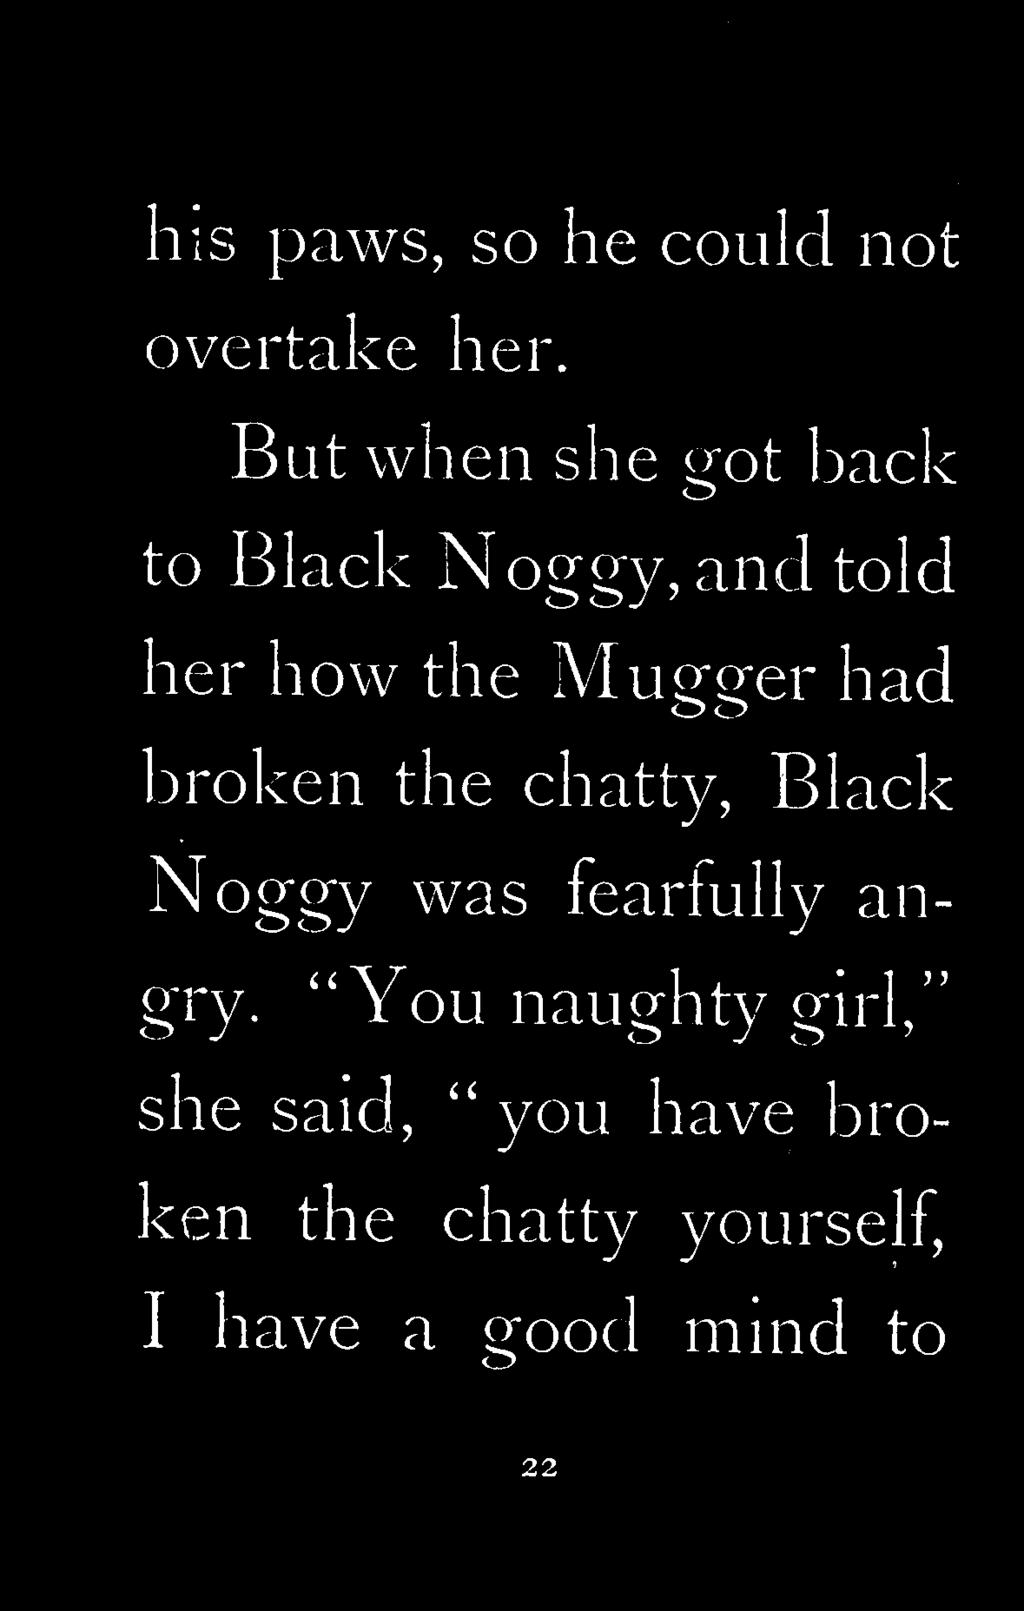 Mugger had broken the chatty, Black Noggy was fearfully angry.